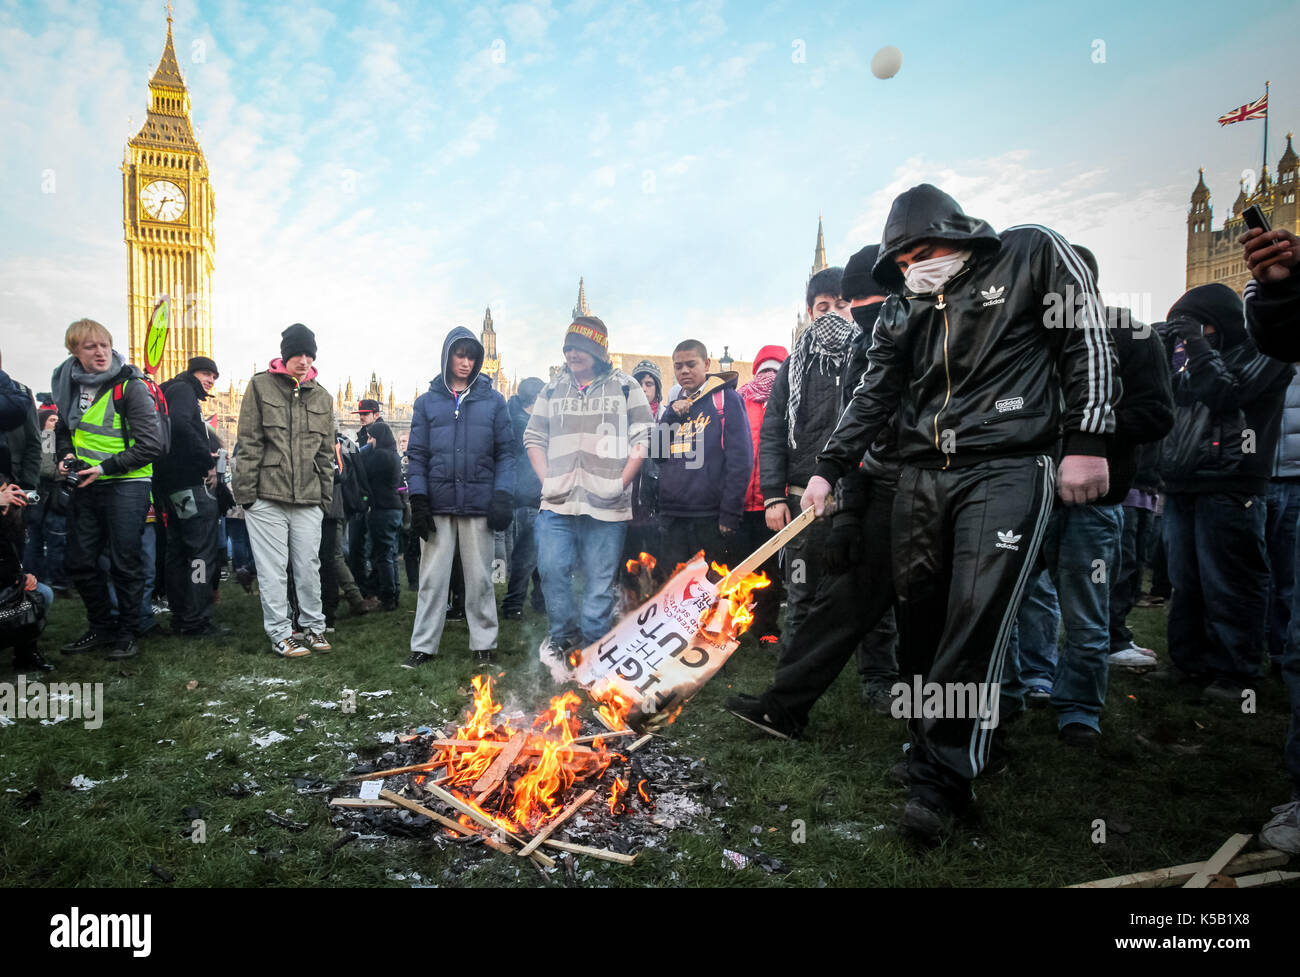 Burning placards. Mass student protests and civil unrest in London against increases in university tuition fees. Stock Photo